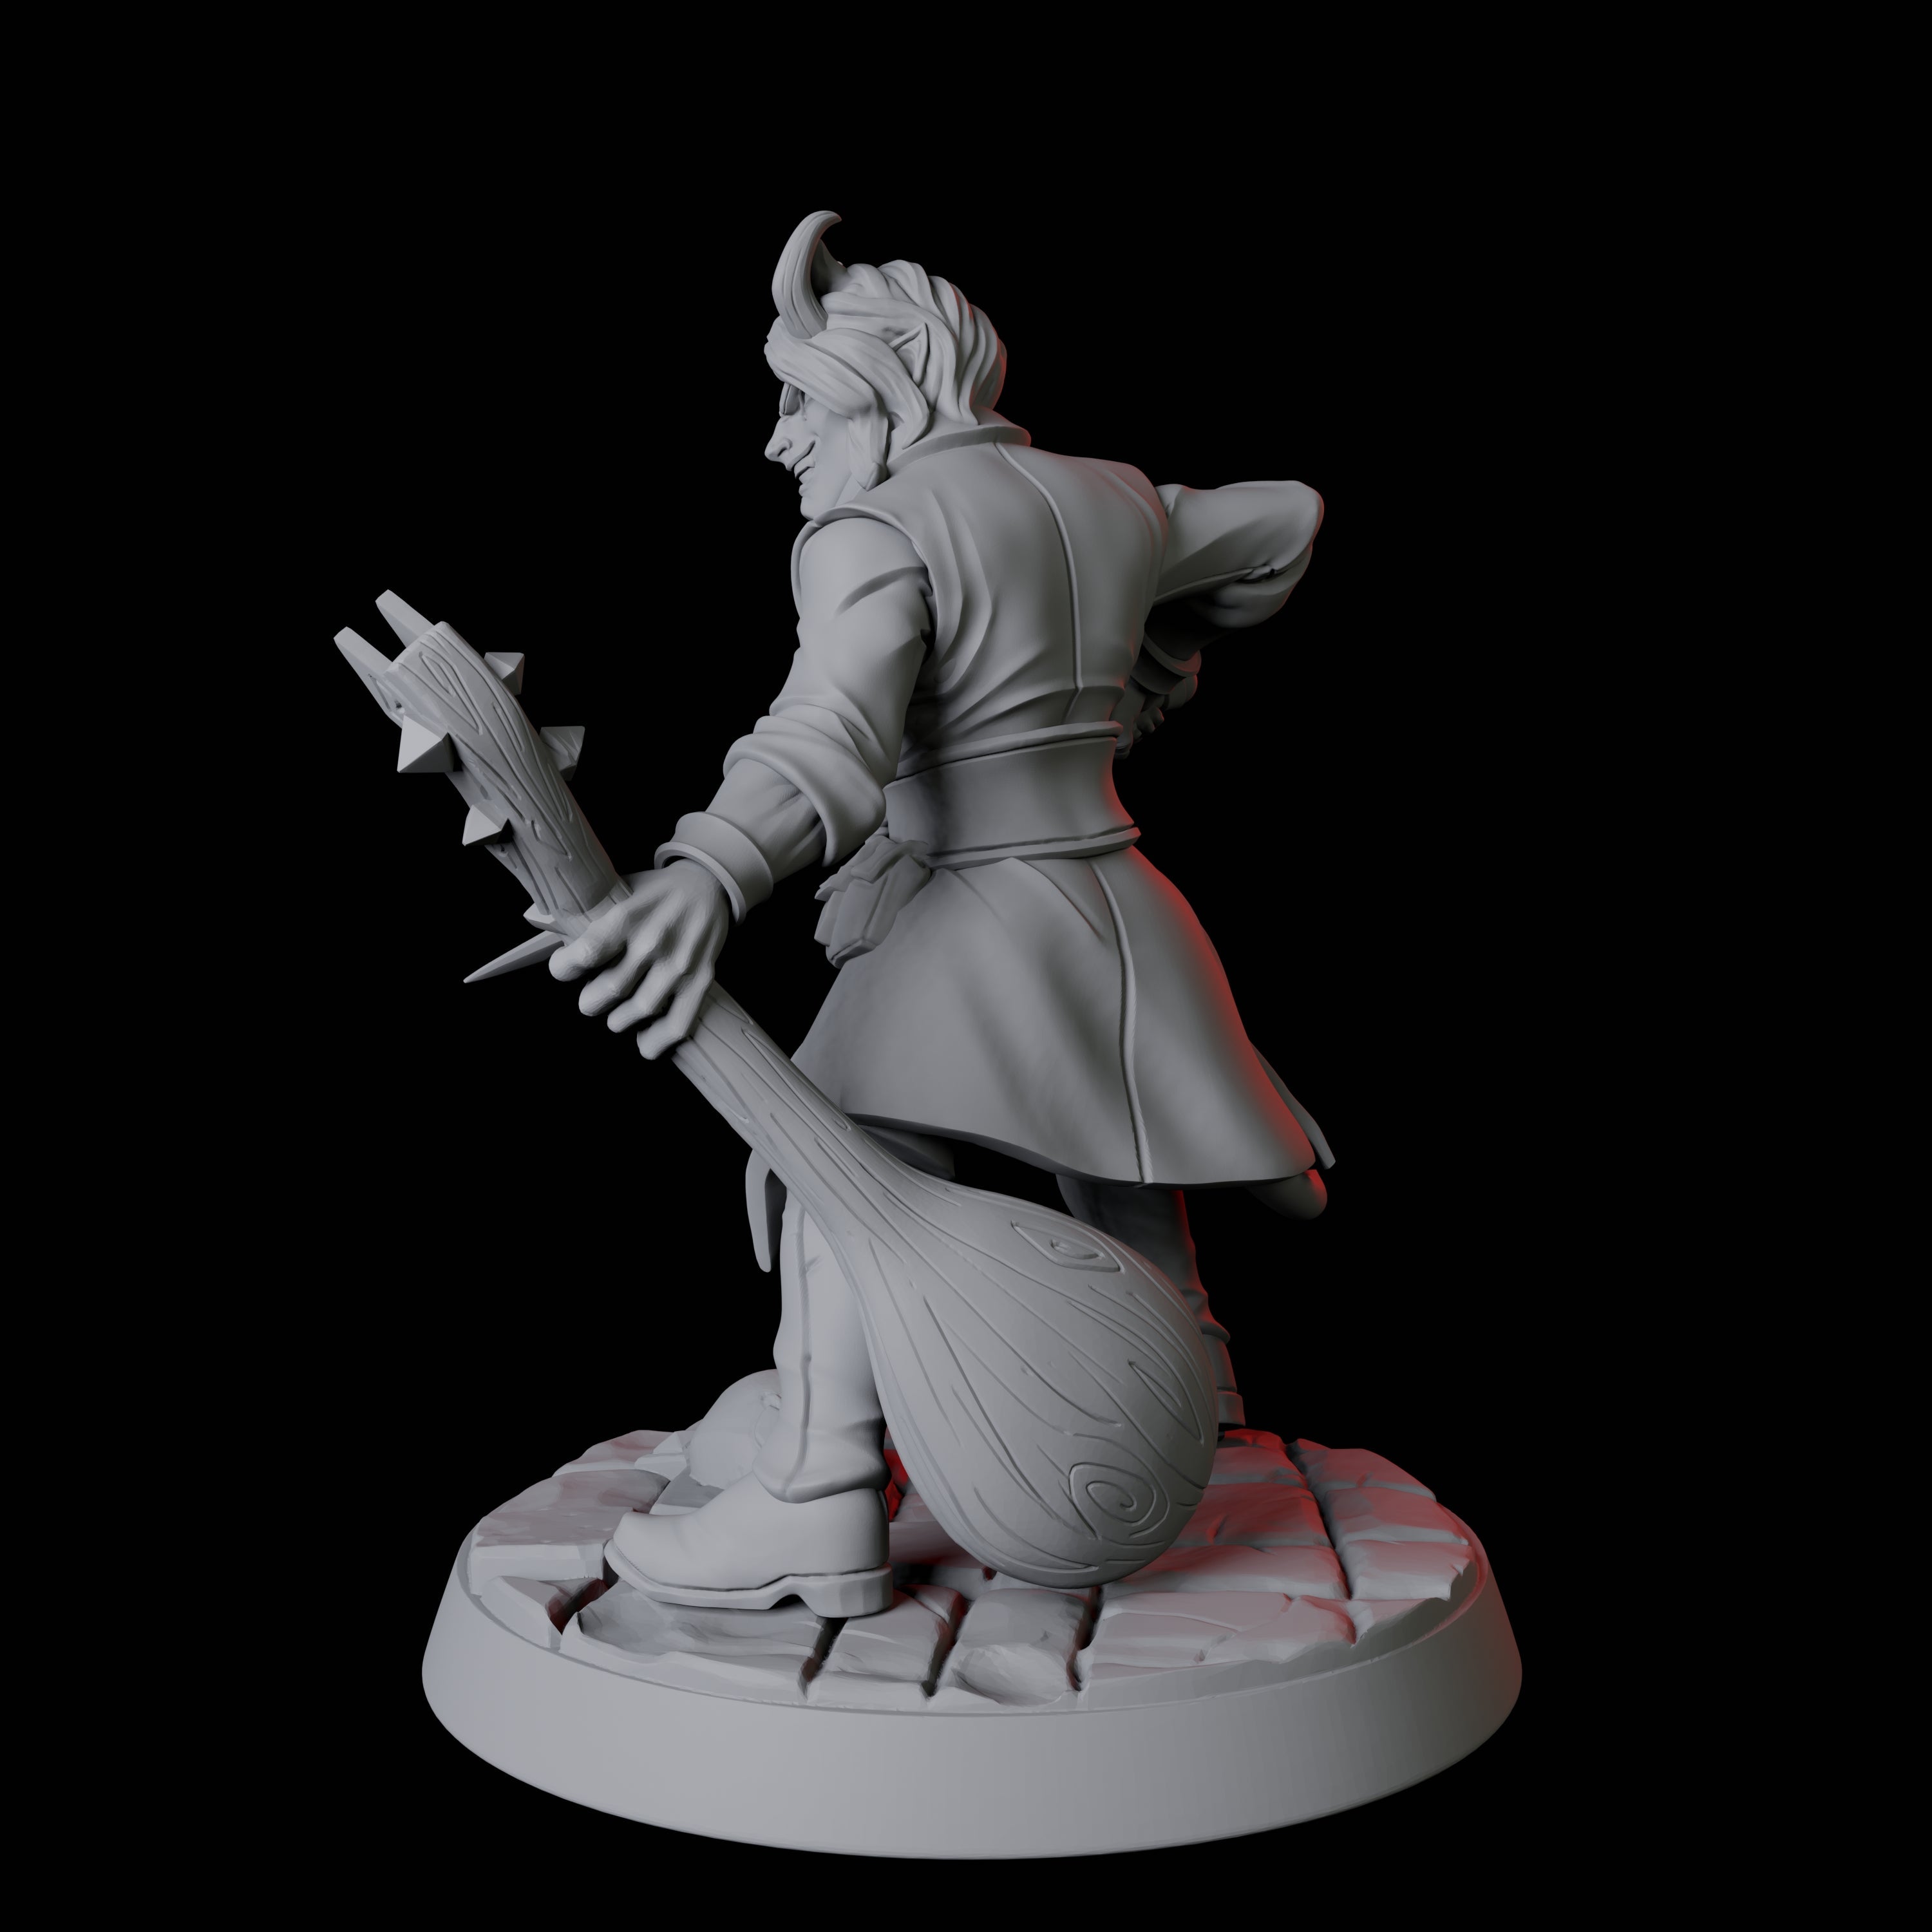 Tiefling Bard B Miniature for Dungeons and Dragons, Pathfinder or other TTRPGs